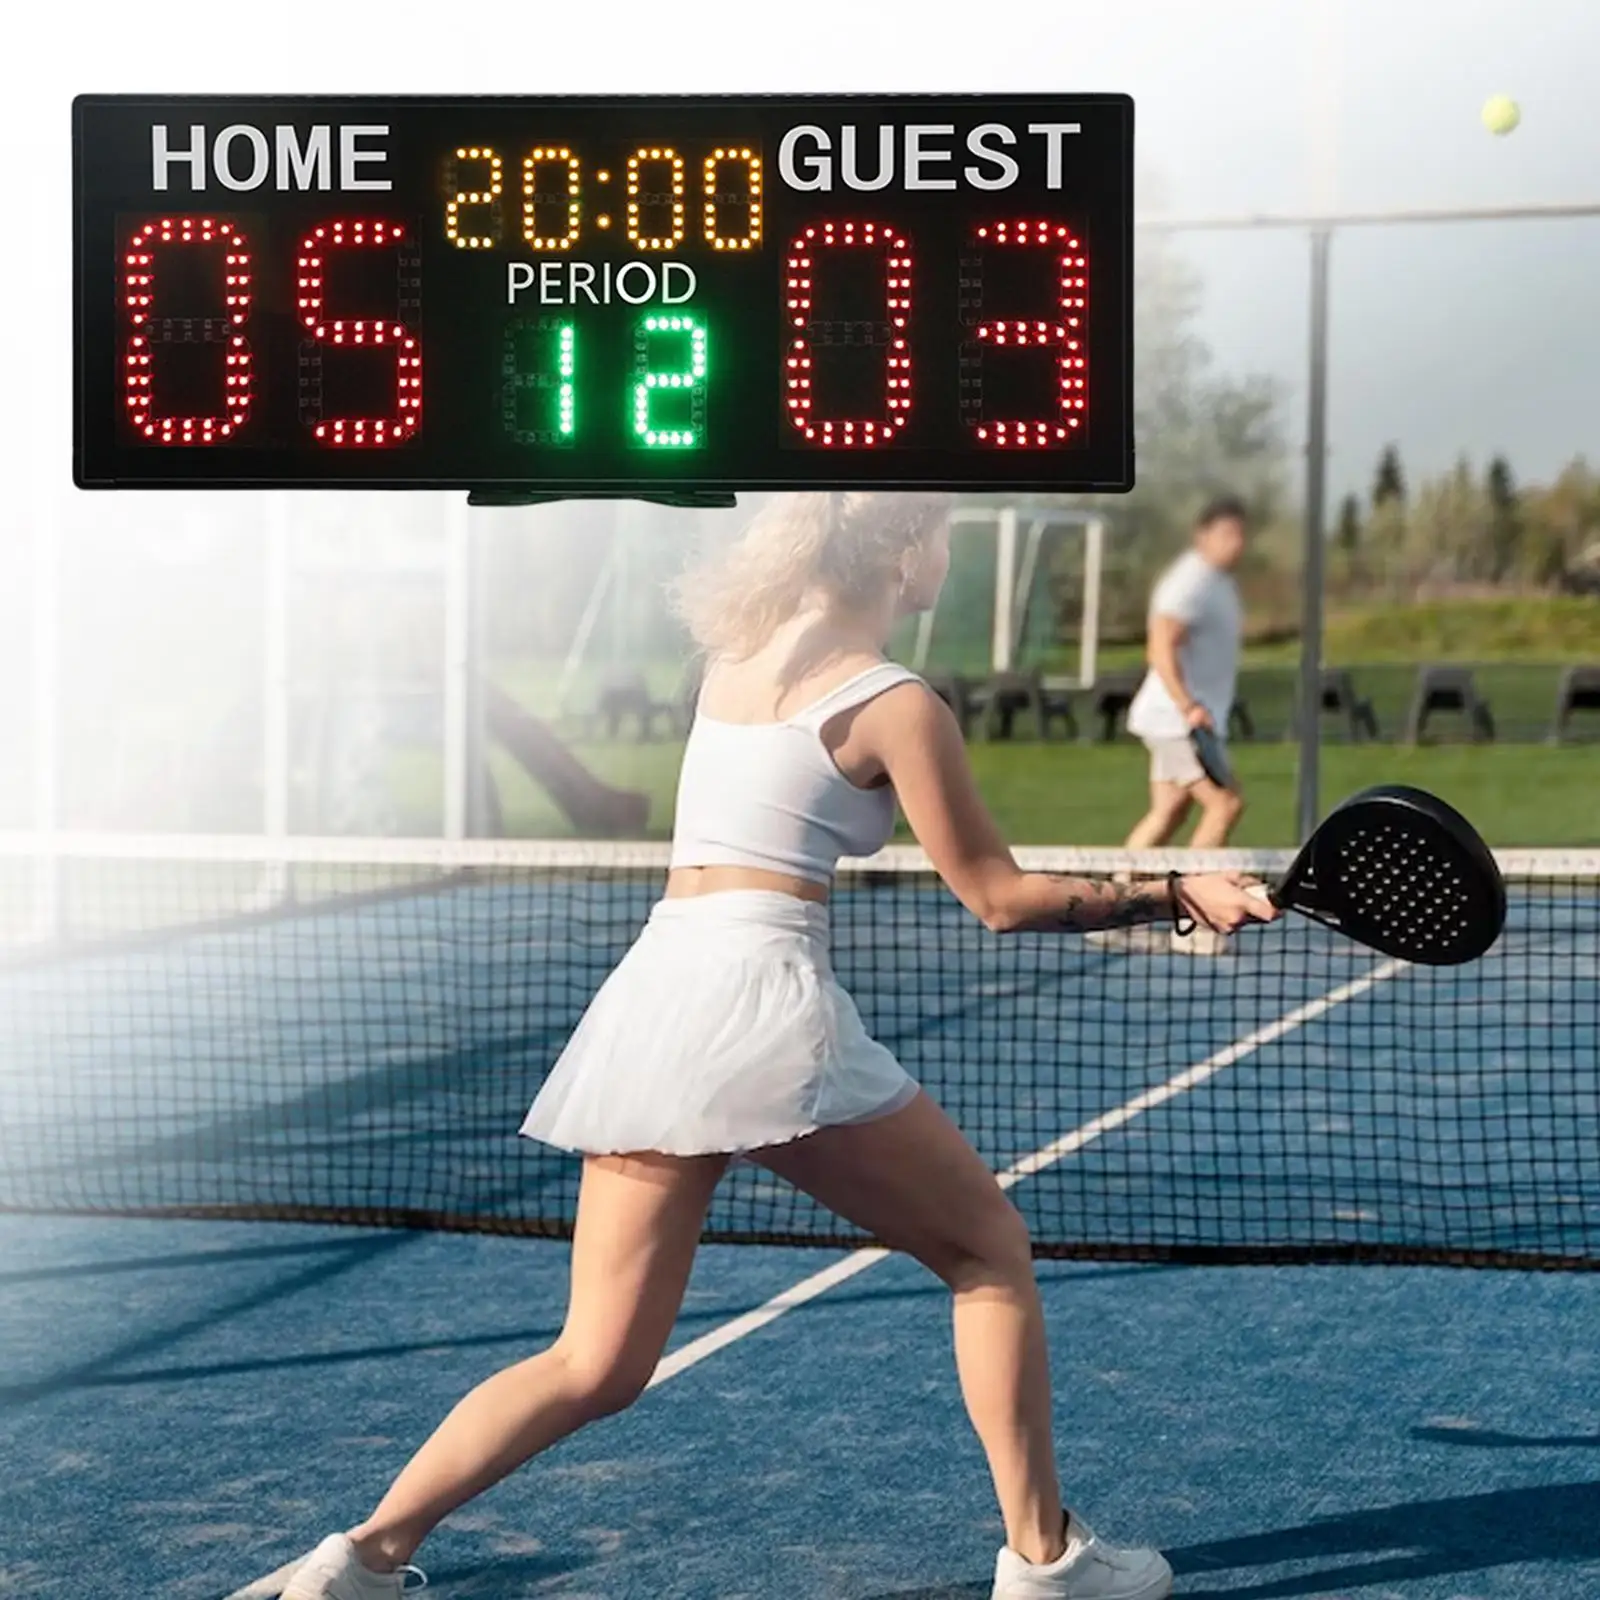 Electronic Scoreboard Home Guest Professional Digital Score Board Tennis Score Keeper for Soccer Table Tennis Volleyball Games